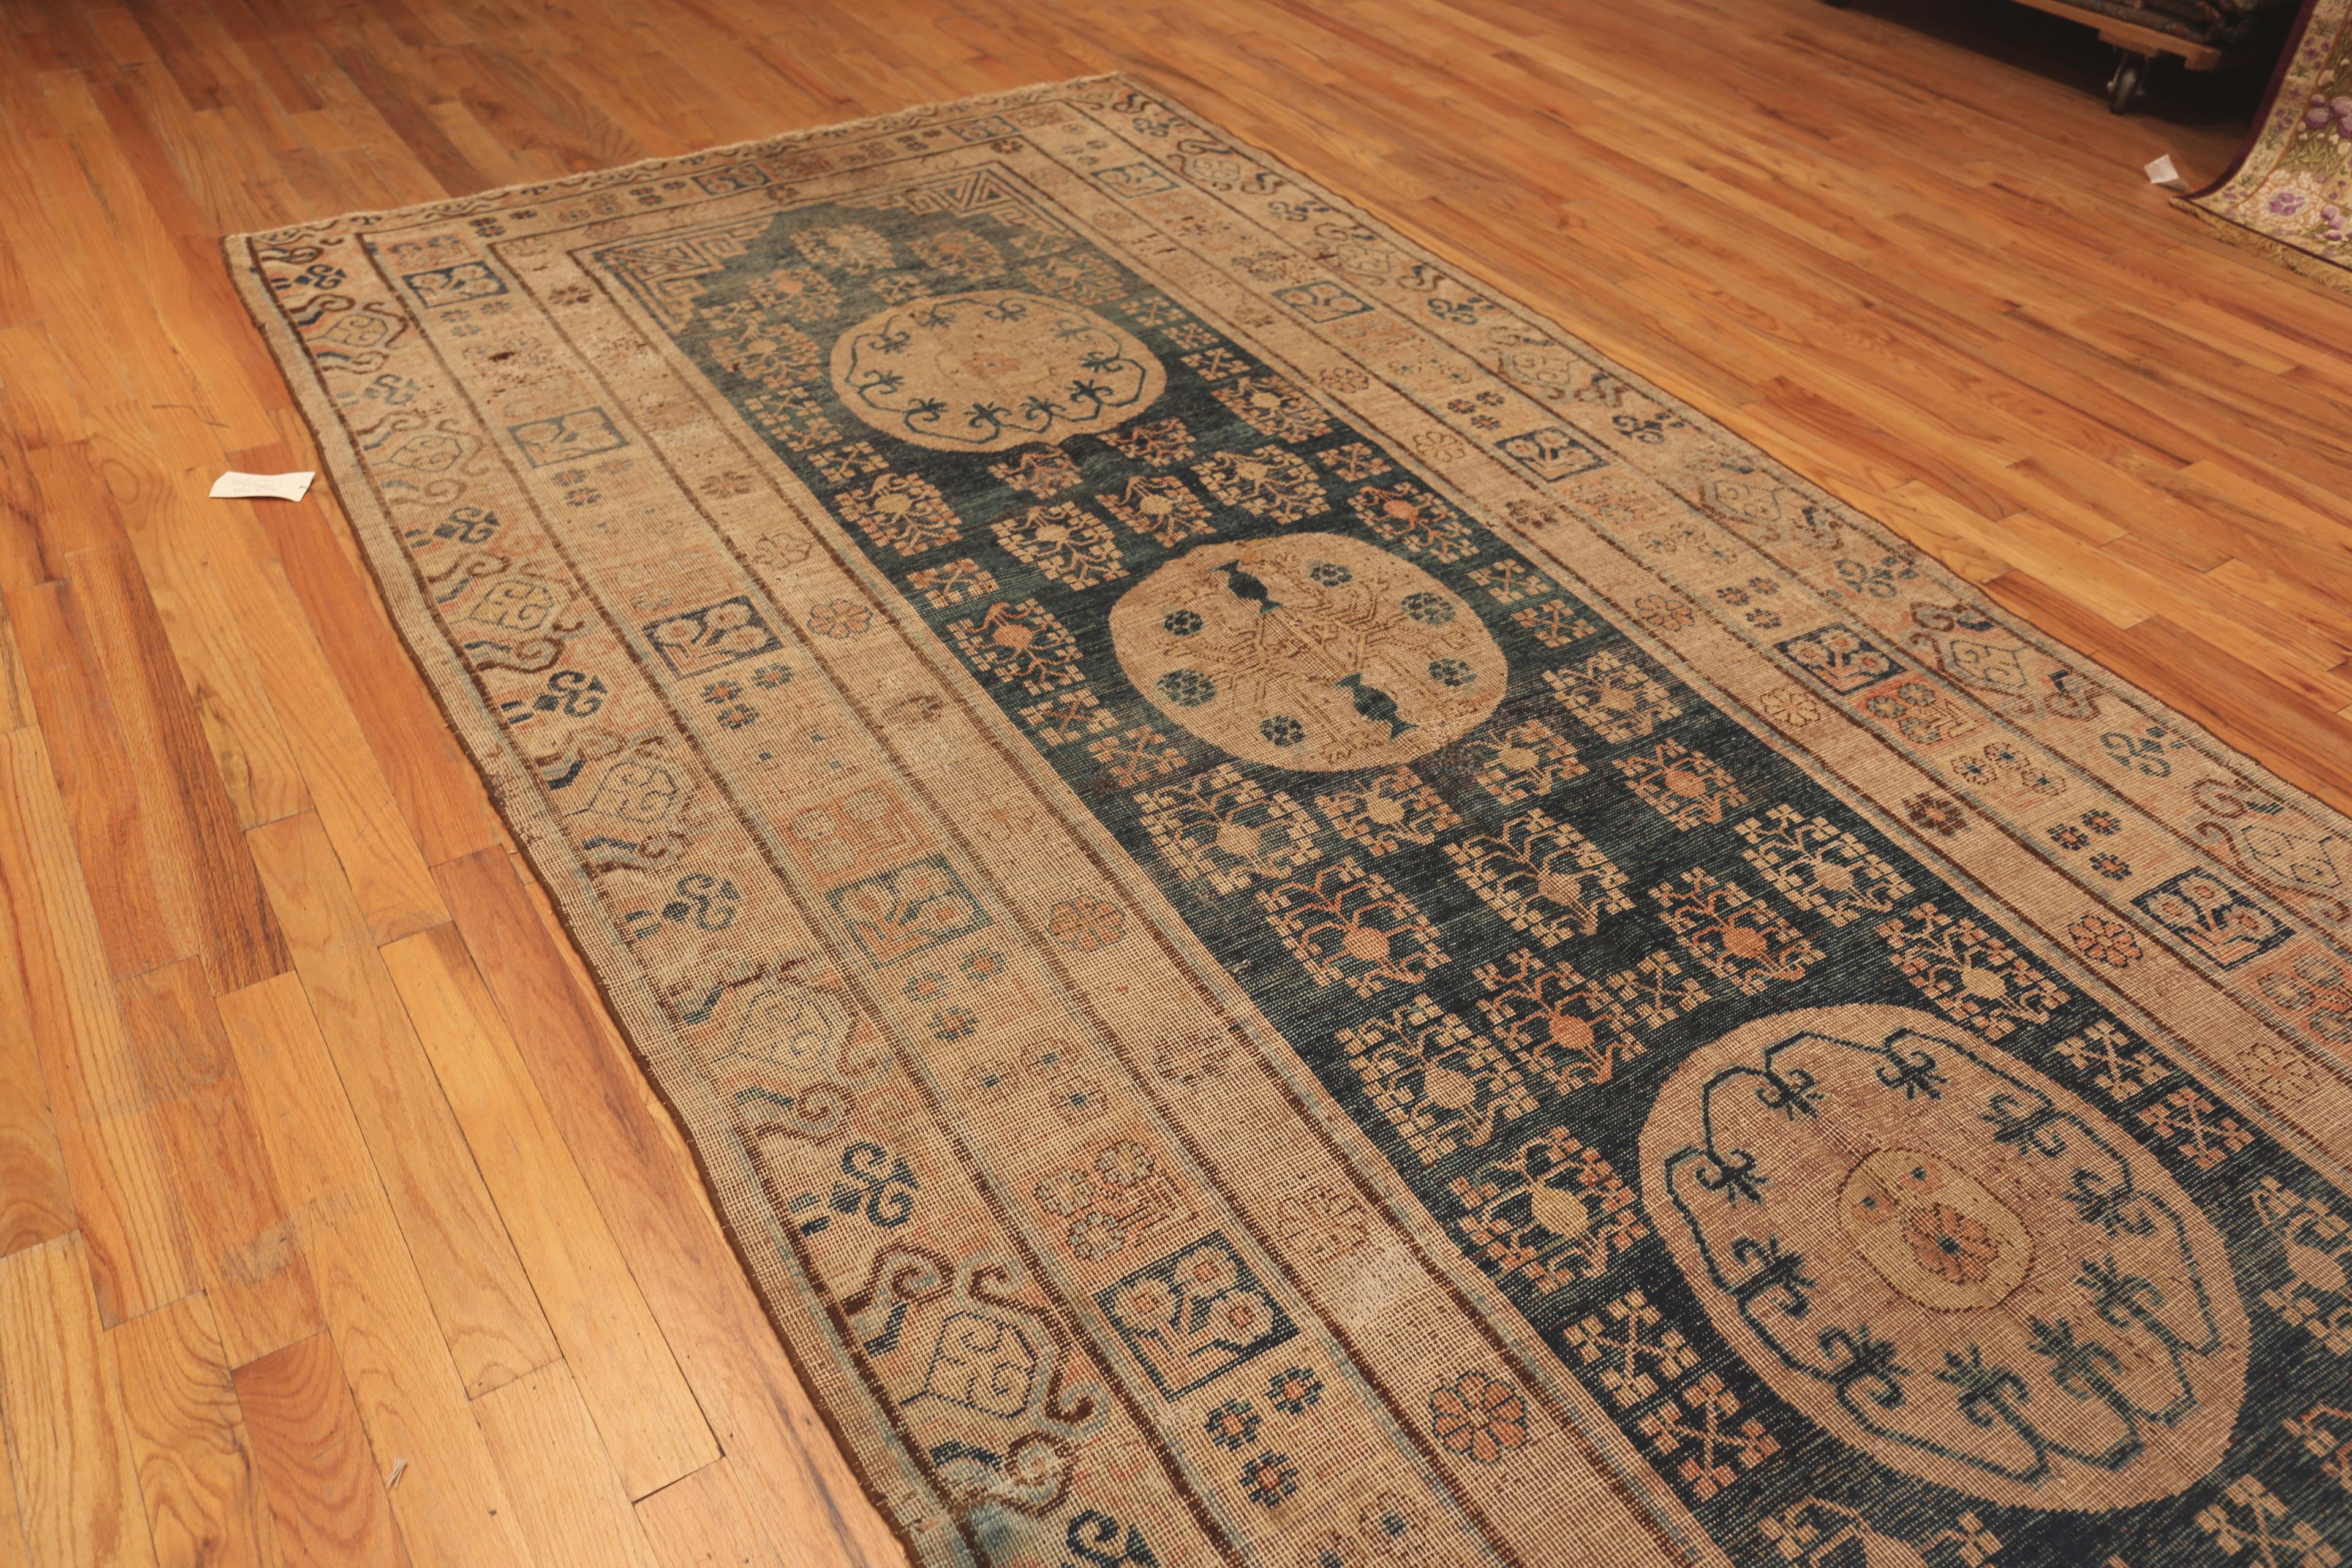 Antique Khotan East Turkestan Rug, Country of Origin / Rug Type: East Turkestan Rugs, Circa date: 1900. Size: 6 ft 6 in x 13 ft 9 in (1.98 m x 4.19 m)